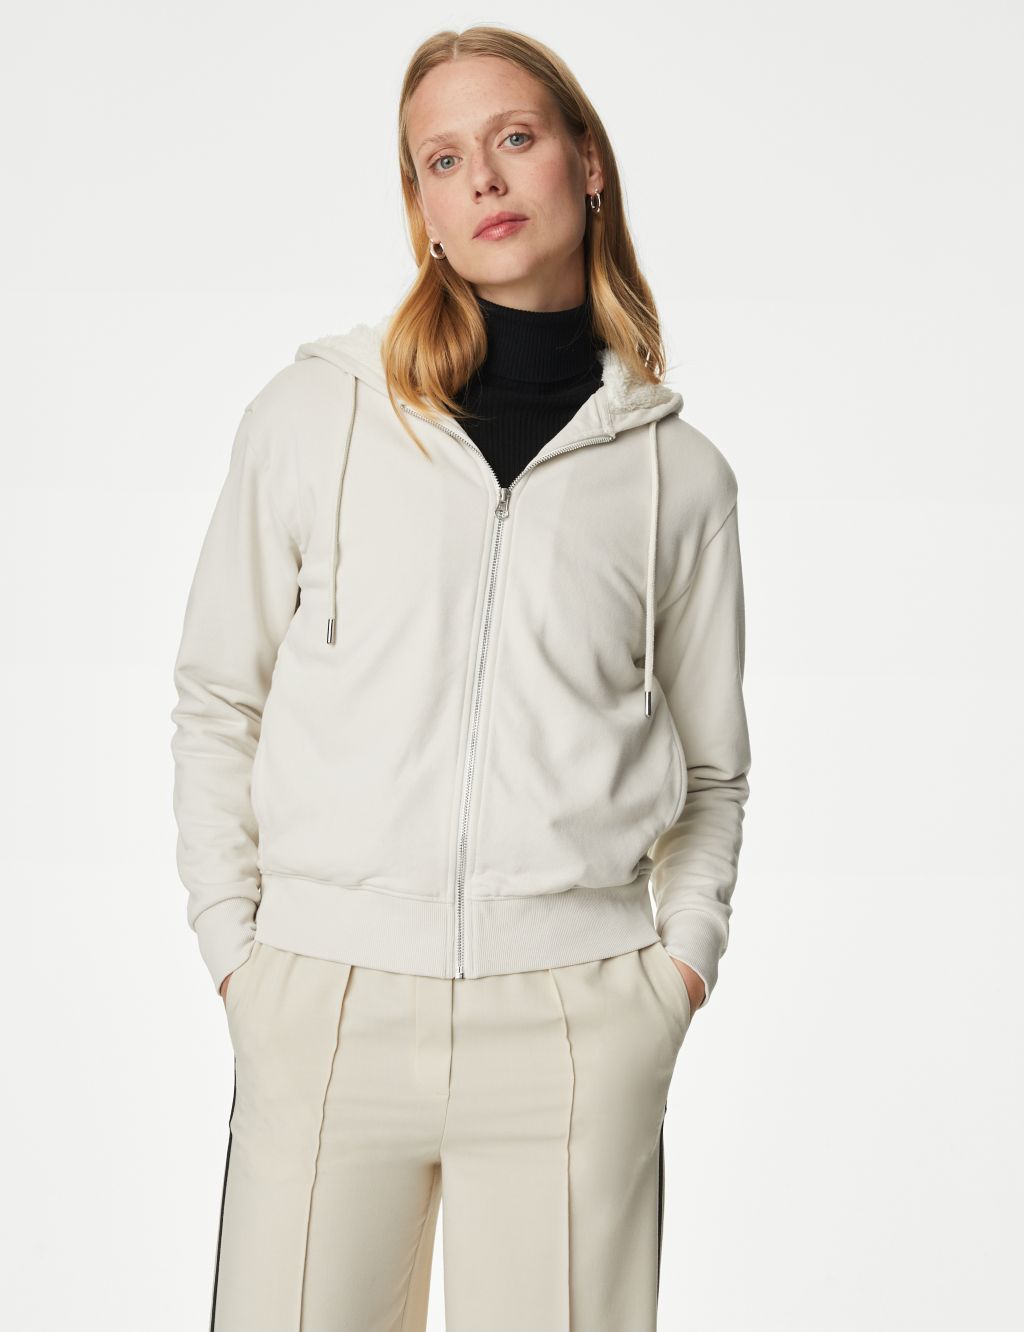 Cotton Rich Borg Lined Zip Up Hoodie image 4